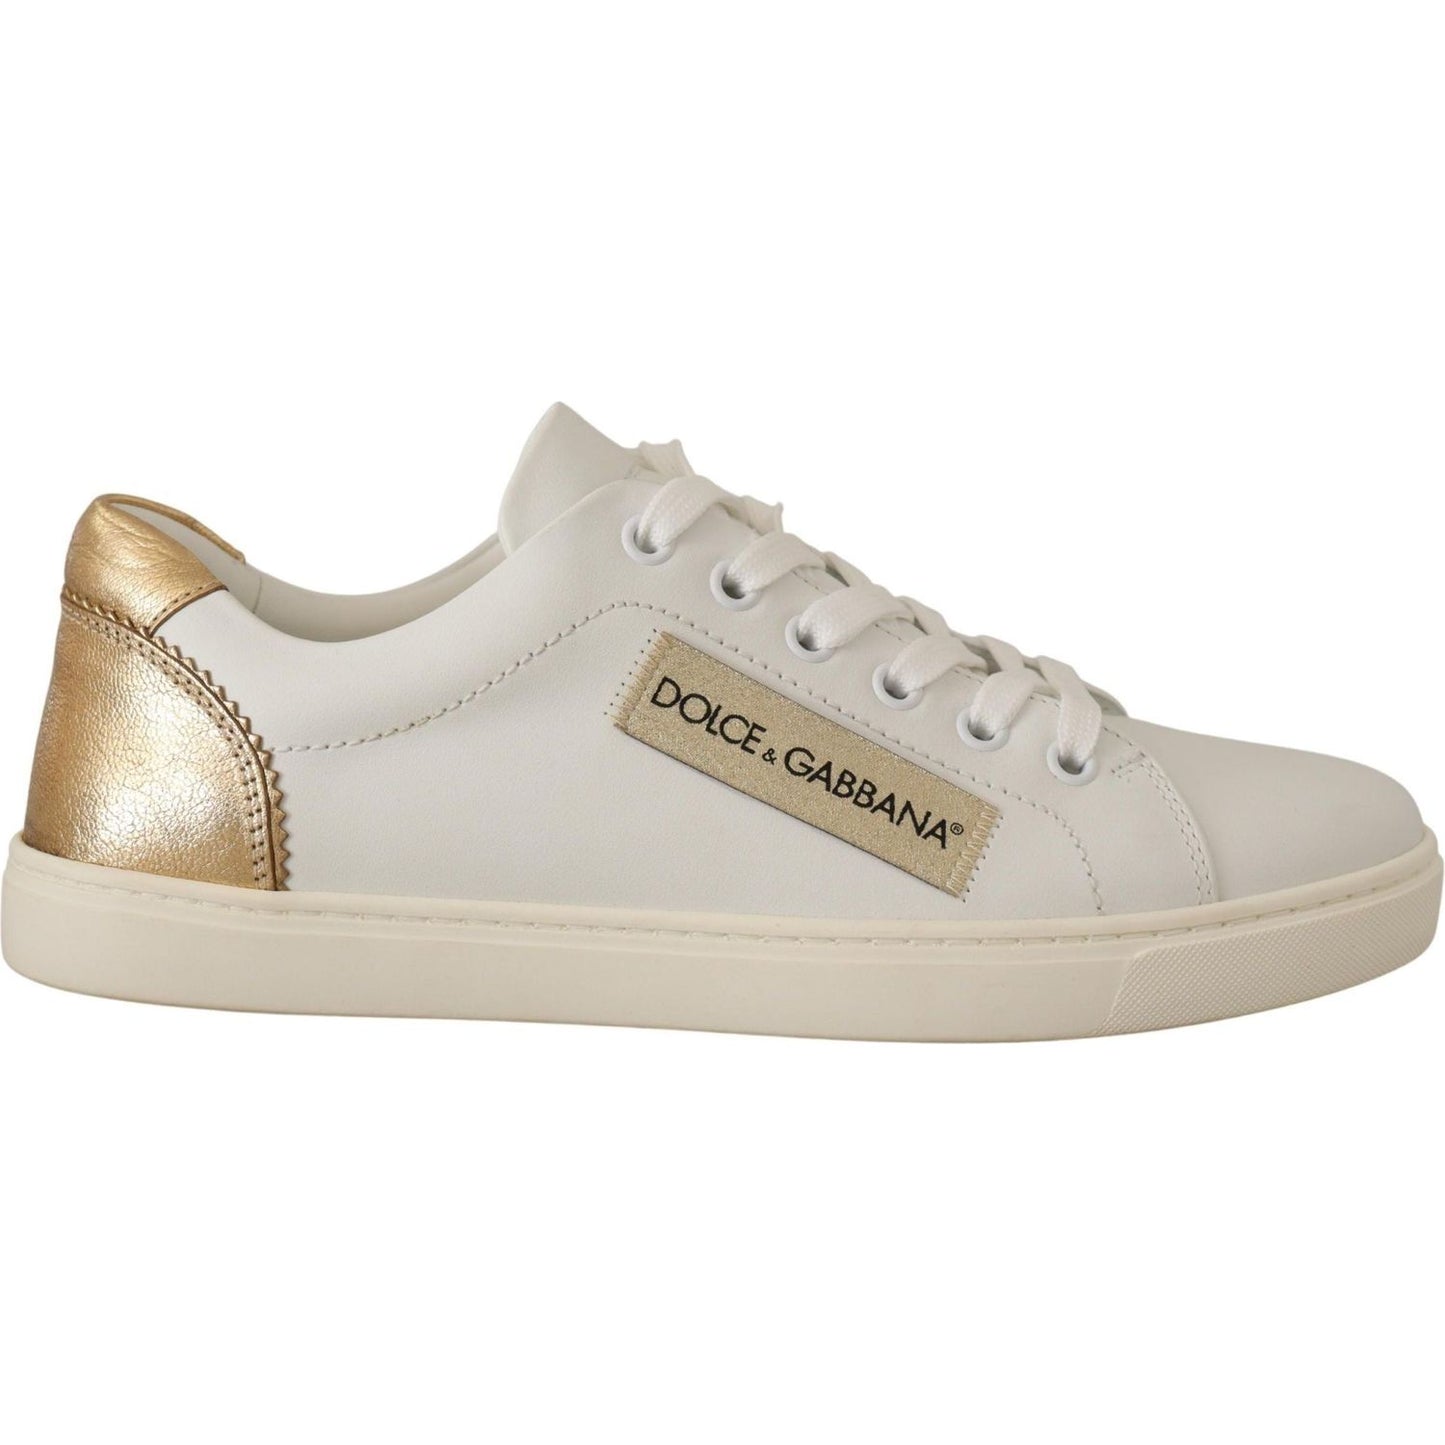 Dolce & Gabbana Elegant White Leather Sneakers with Gold Accents white-gold-leather-low-top-sneakers IMG_0493-scaled-23a3ed3e-55c.jpg